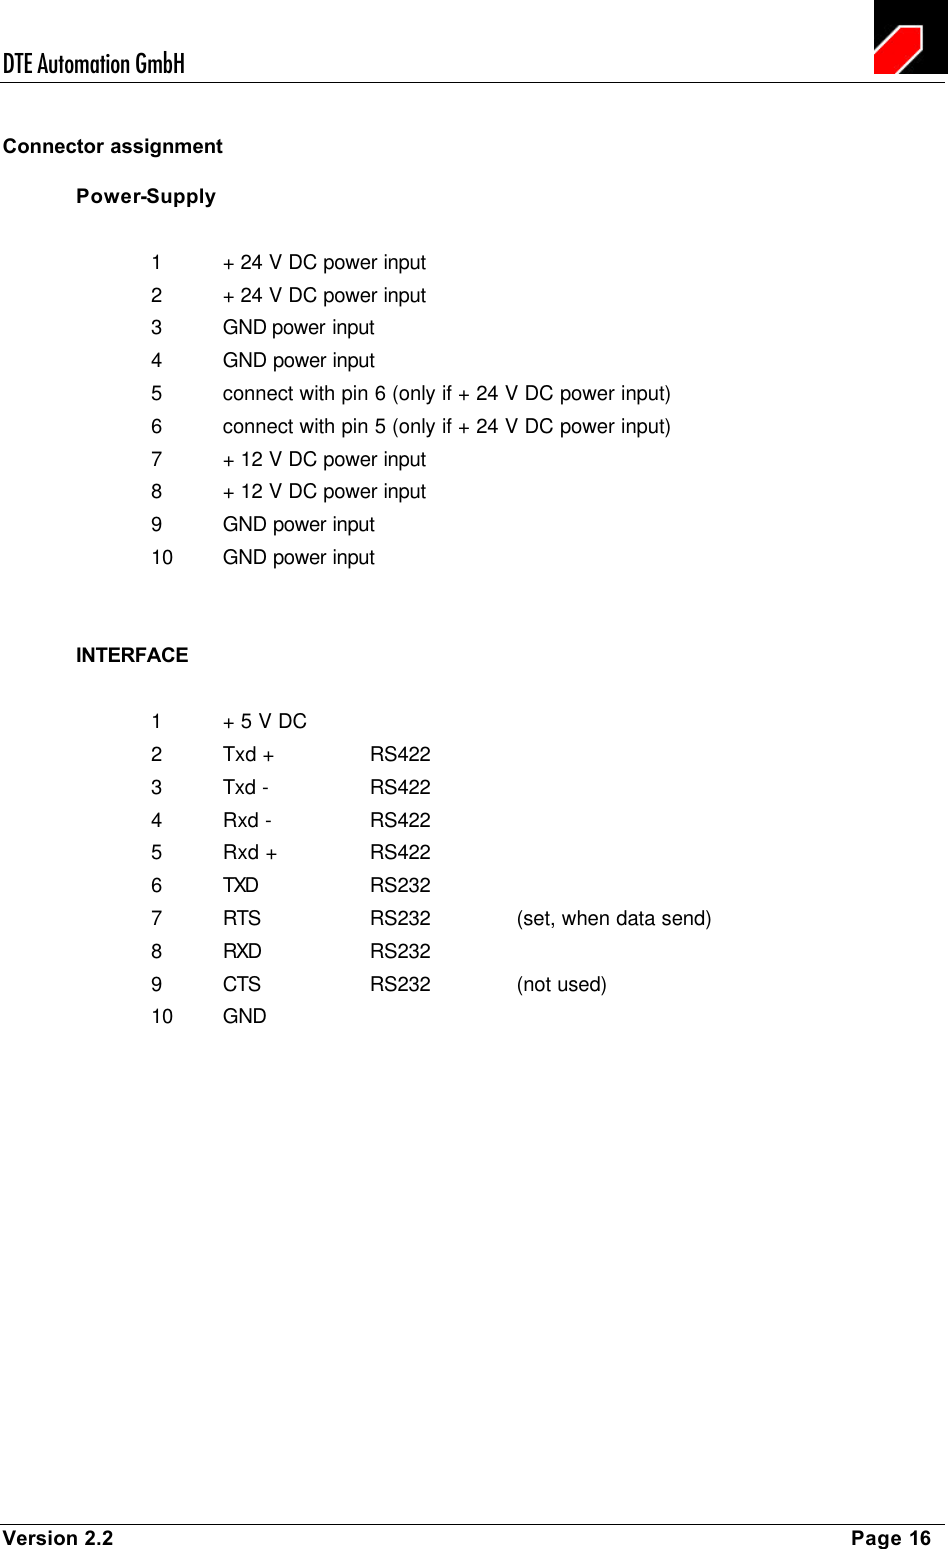 DTE Automation GmbH    Version 2.2    Page 16 Connector assignment Power-Supply  1 + 24 V DC power input   2 + 24 V DC power input   3 GND power input 4 GND power input 5 connect with pin 6 (only if + 24 V DC power input) 6 connect with pin 5 (only if + 24 V DC power input) 7 + 12 V DC power input   8 + 12 V DC power input   9 GND power input 10 GND power input   INTERFACE  1 + 5 V DC 2 Txd +    RS422 3 Txd -    RS422 4 Rxd -    RS422 5 Rxd +    RS422 6 TXD    RS232 7 RTS    RS232    (set, when data send) 8 RXD    RS232 9 CTS    RS232    (not used) 10 GND   